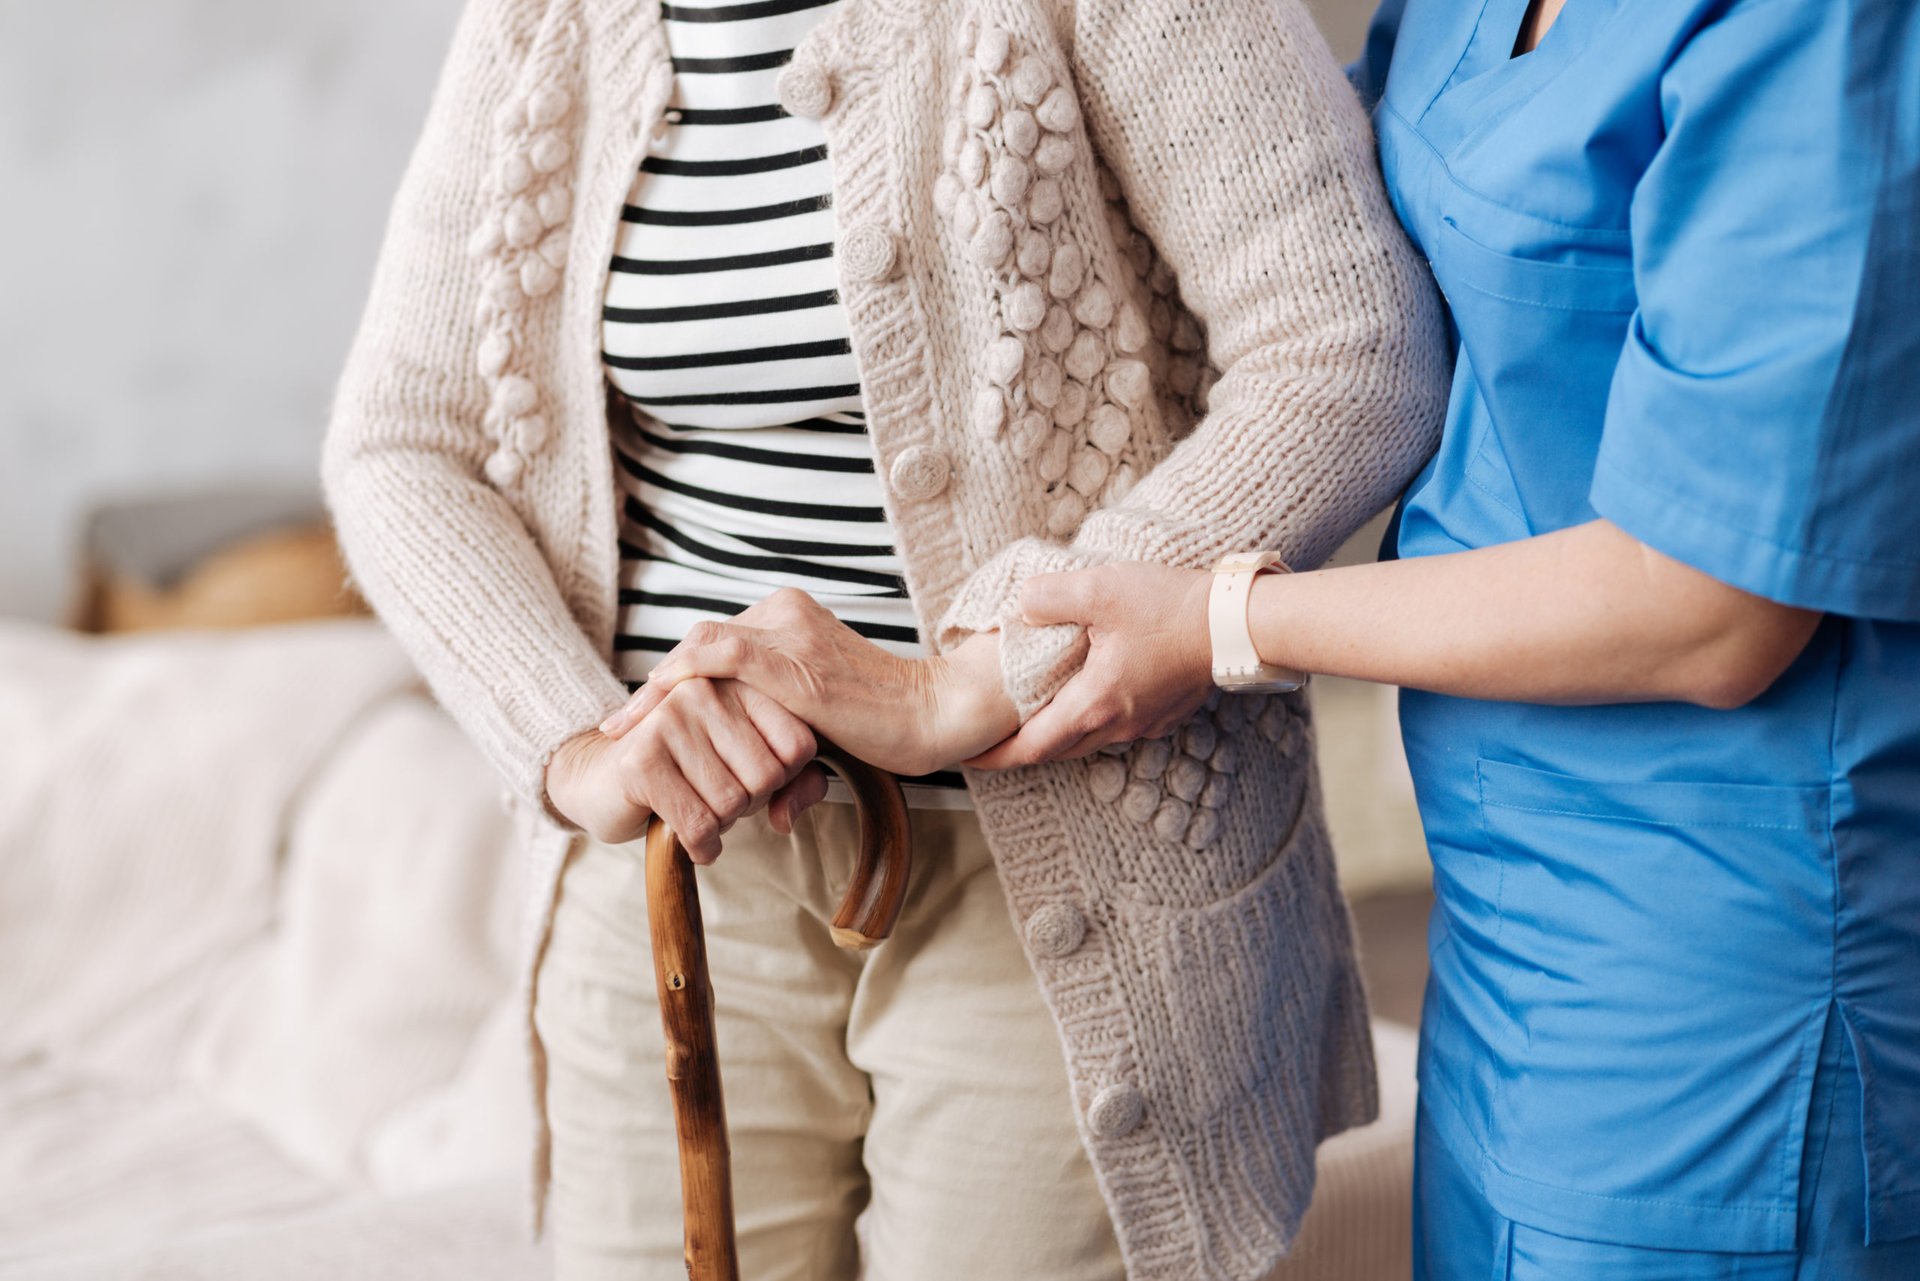 A nurse helps an older patient walk with a cane